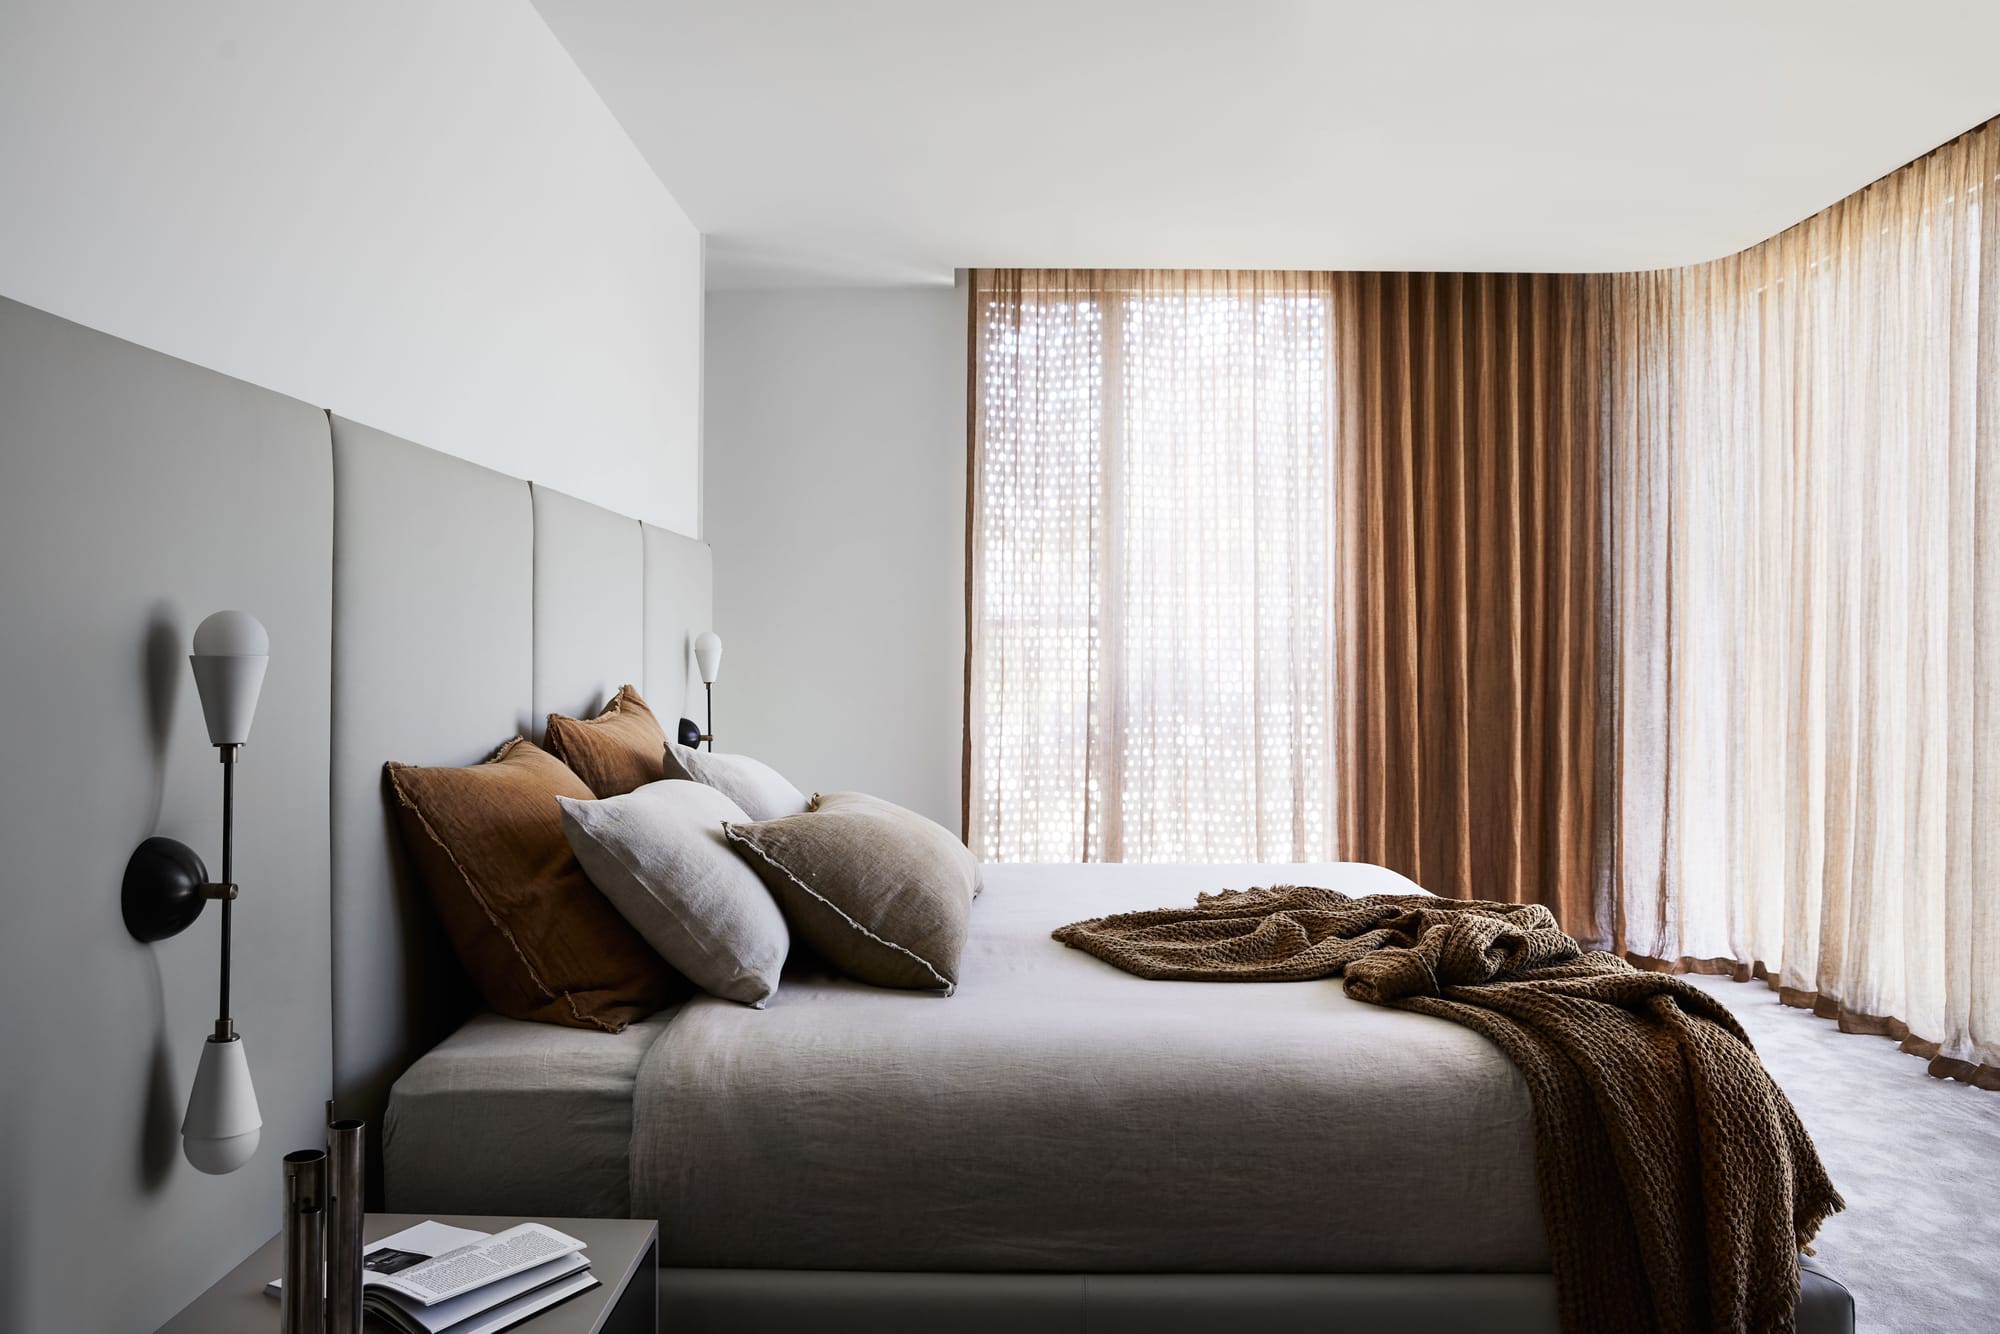 The Split Home by Seidler Group. Copyright of Seidler Group. Residential bedroom with floor to ceiling windows covered with orange sheer curtains. Grey upholstered bedhead runs length of wall behind bed with grey linen. 